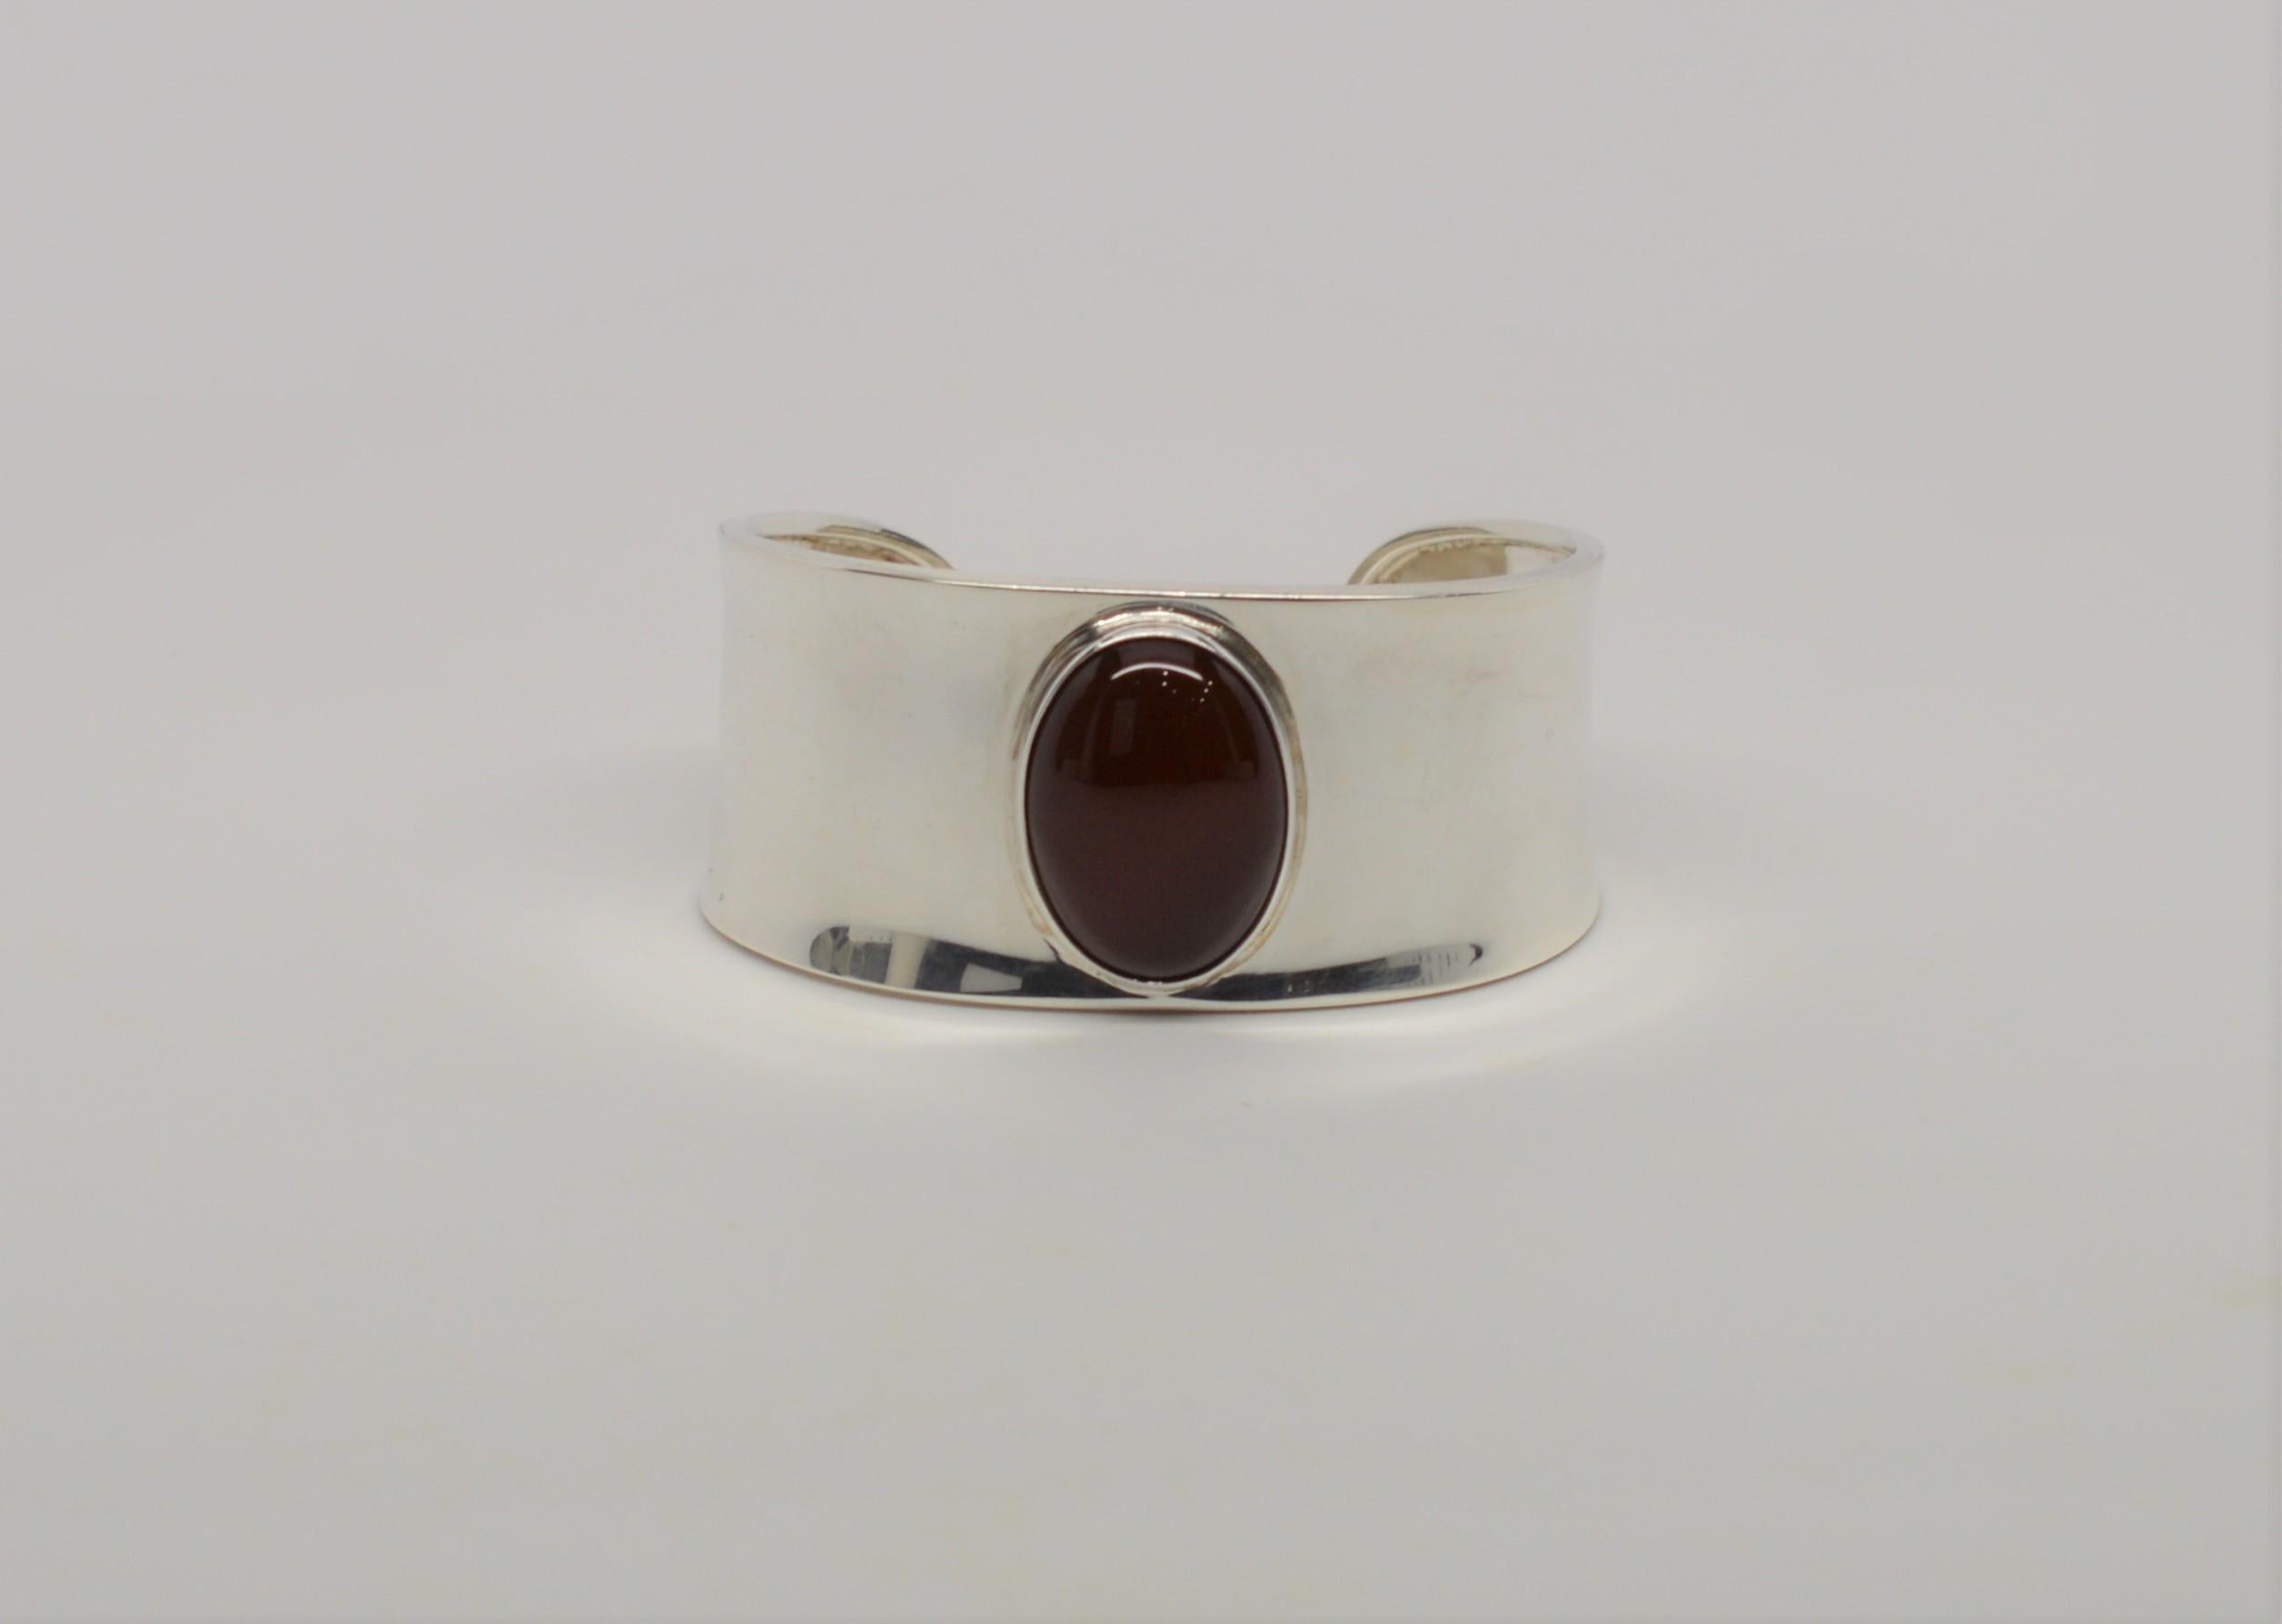 Beautiful Sterling Silver Cuff Bracelet with feature Red Coral Center Stone from our Estate Collection. The Cuff measurements graduate from approximately 1 inch to 1-1/8 inch at the widest center point. The rich red Coral Cabochon Stone measures